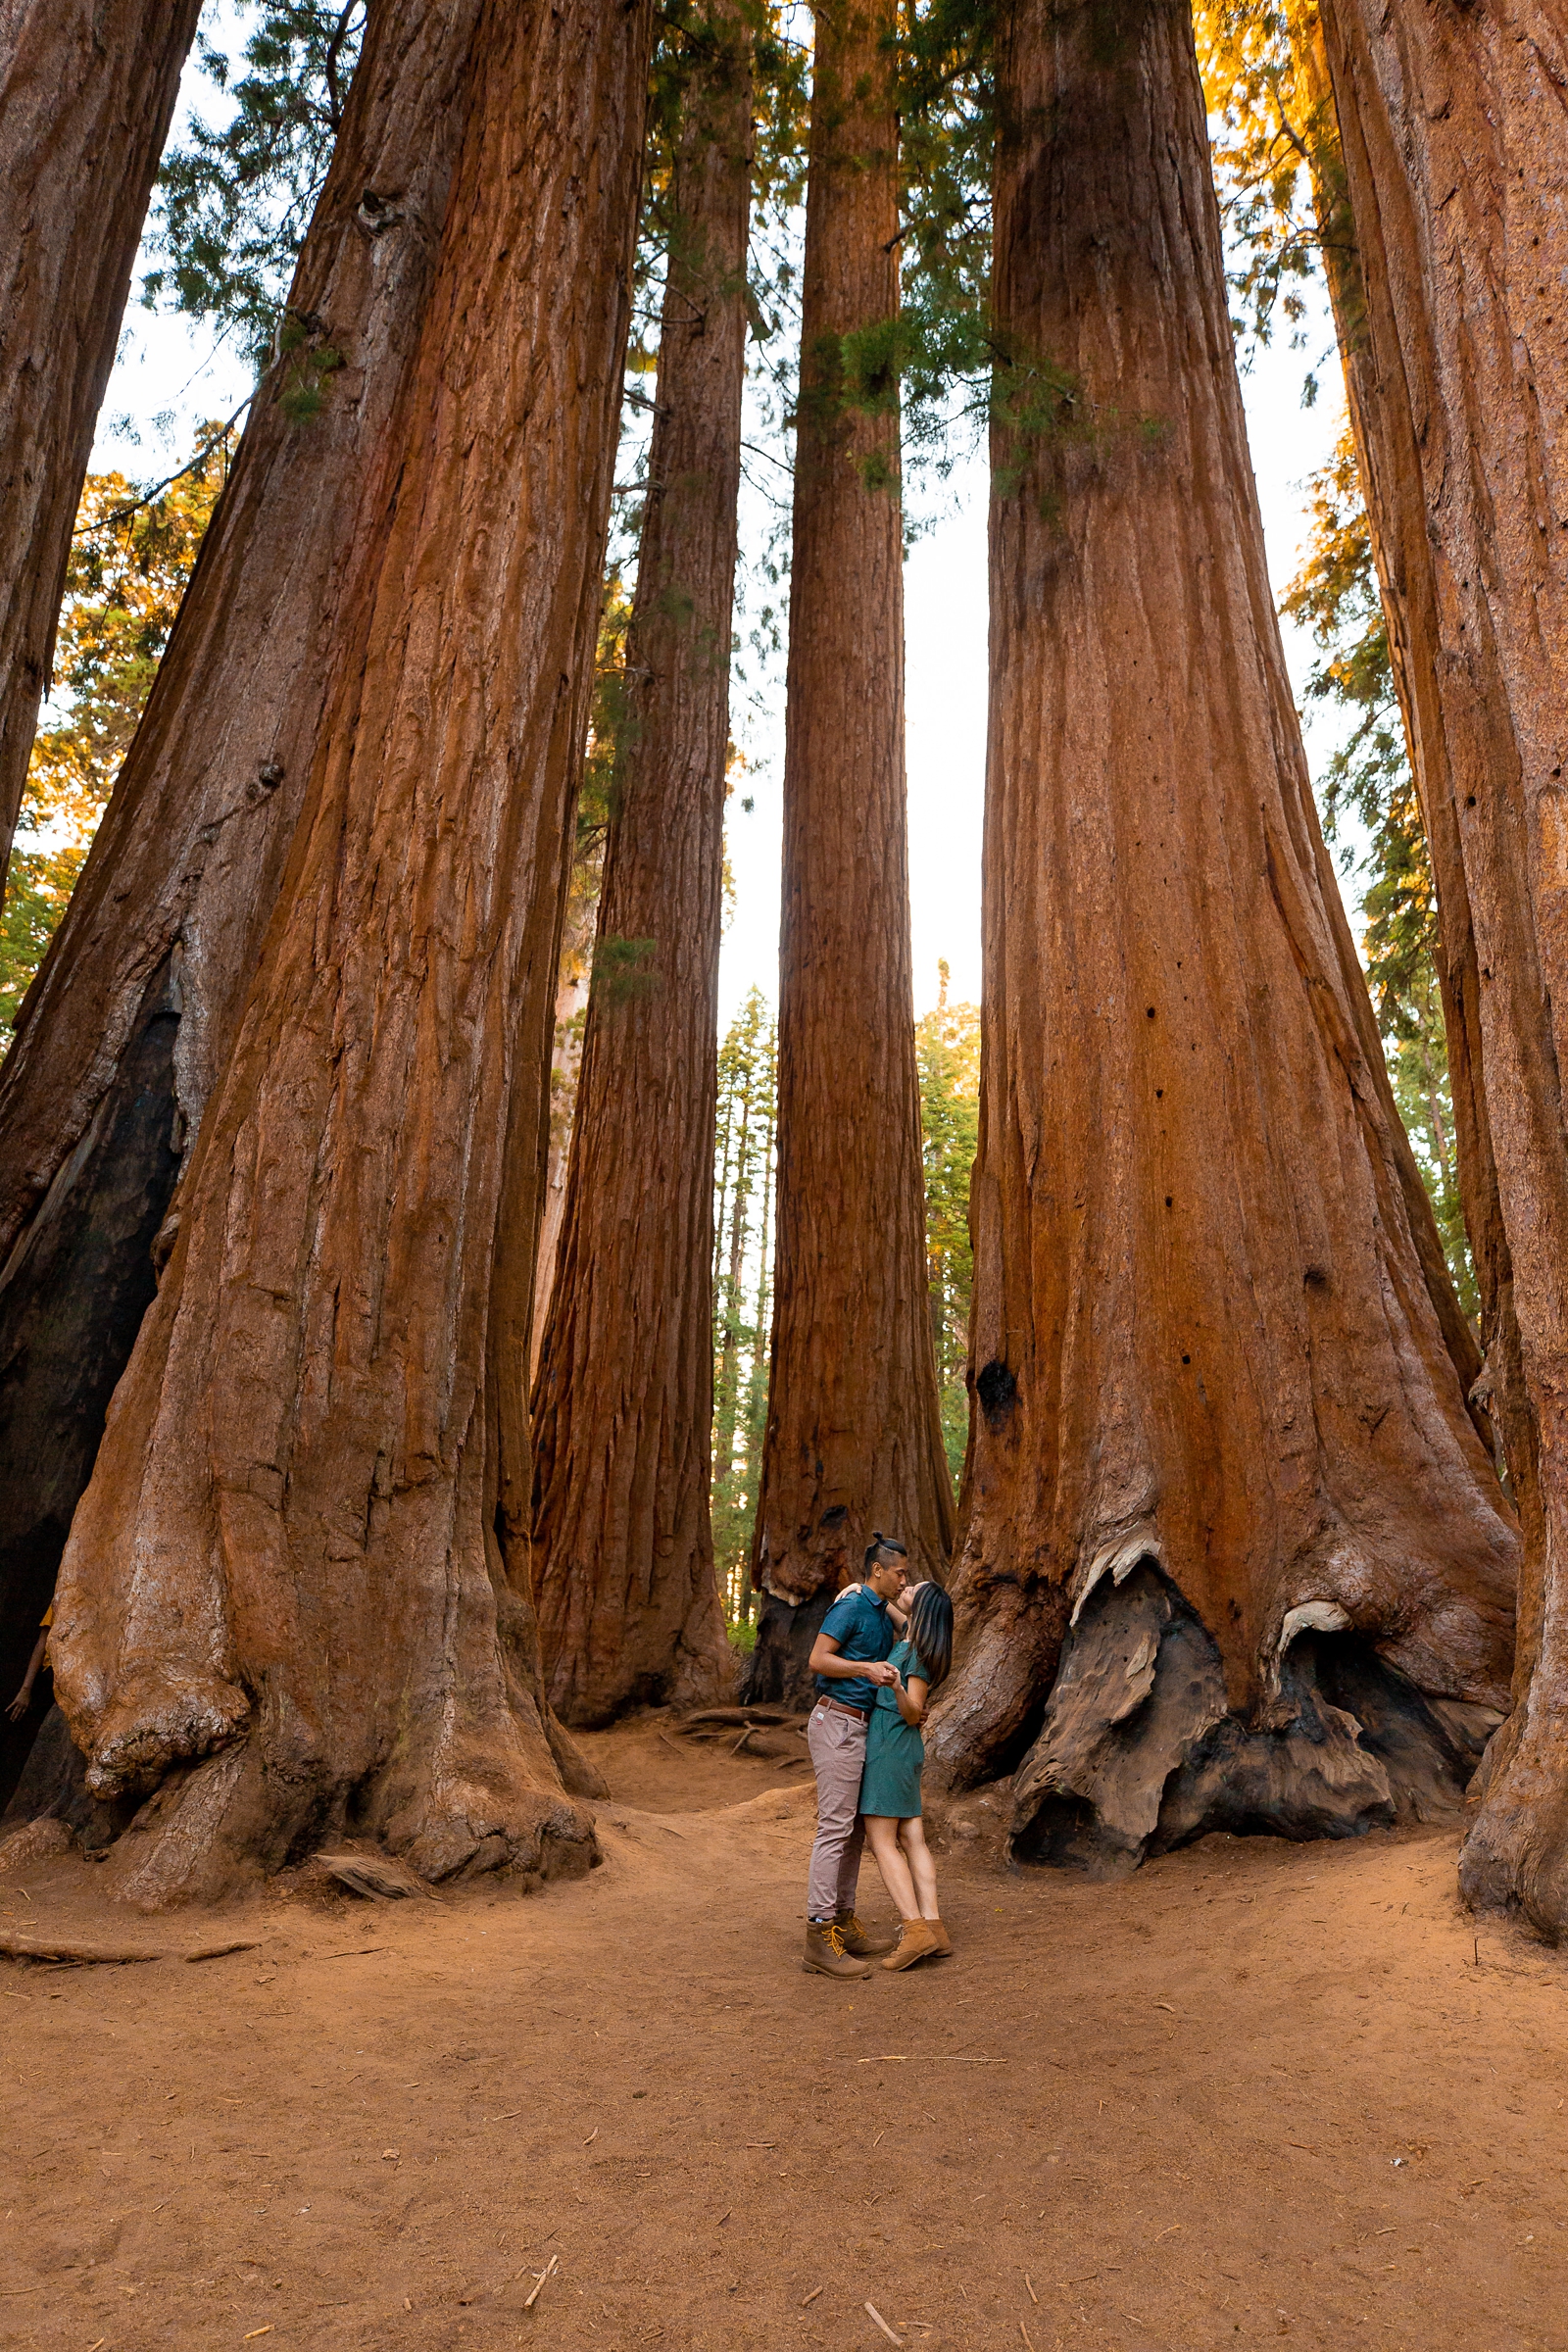 Epic engagement session by giant Sequoias in Sequoia National Park.